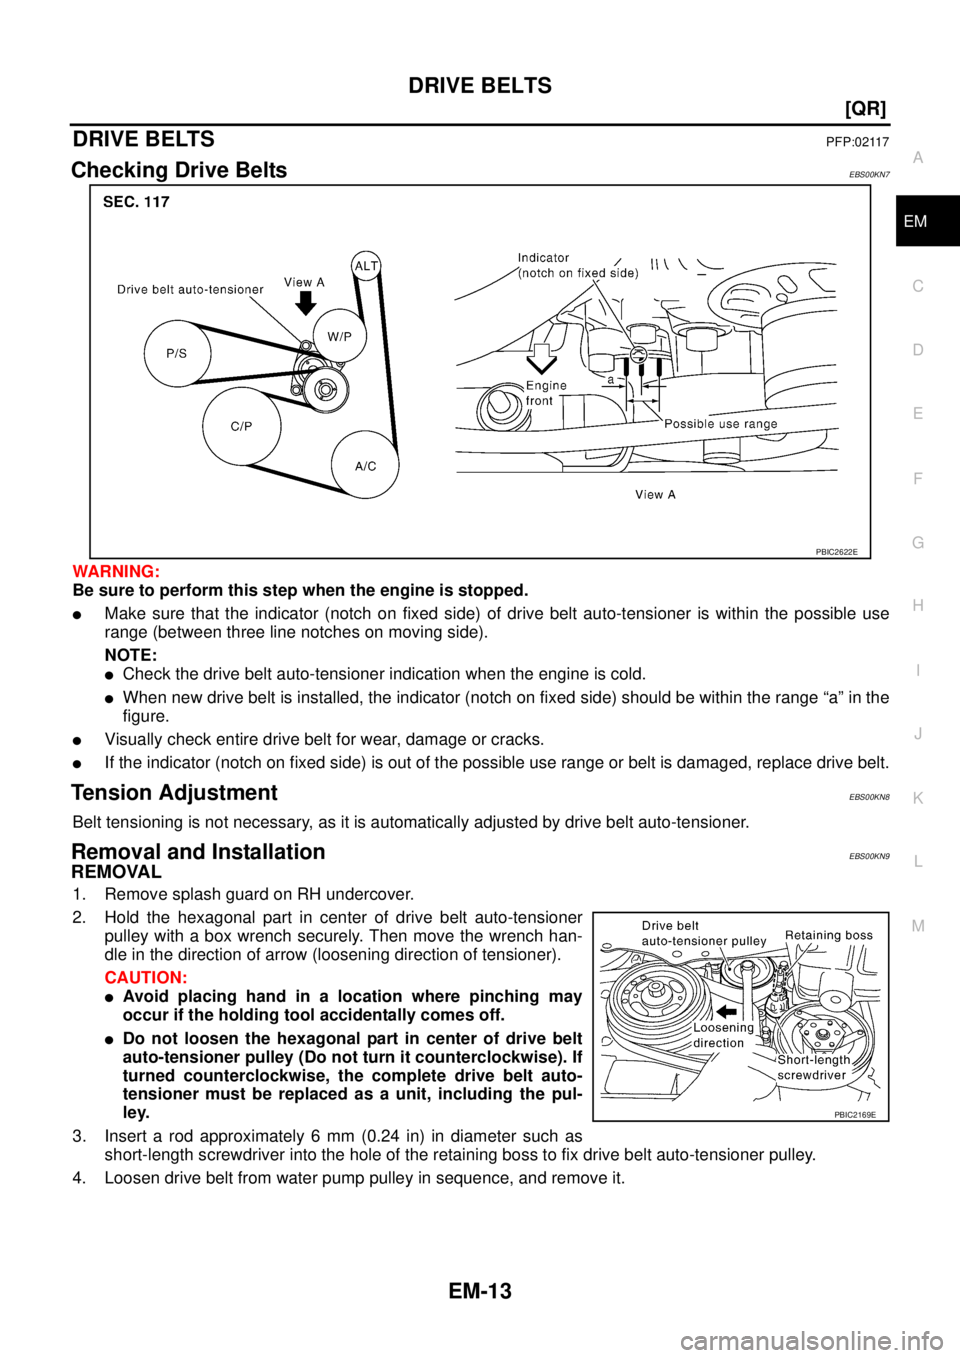 NISSAN X-TRAIL 2005  Service Owners Manual DRIVE BELTS
EM-13
[QR]
C
D
E
F
G
H
I
J
K
L
MA
EM
 
DRIVE BELTSPFP:02117
Checking Drive BeltsEBS00KN7
WARNING:
Be sure to perform this step when the engine is stopped.
Make sure that the indicator (no